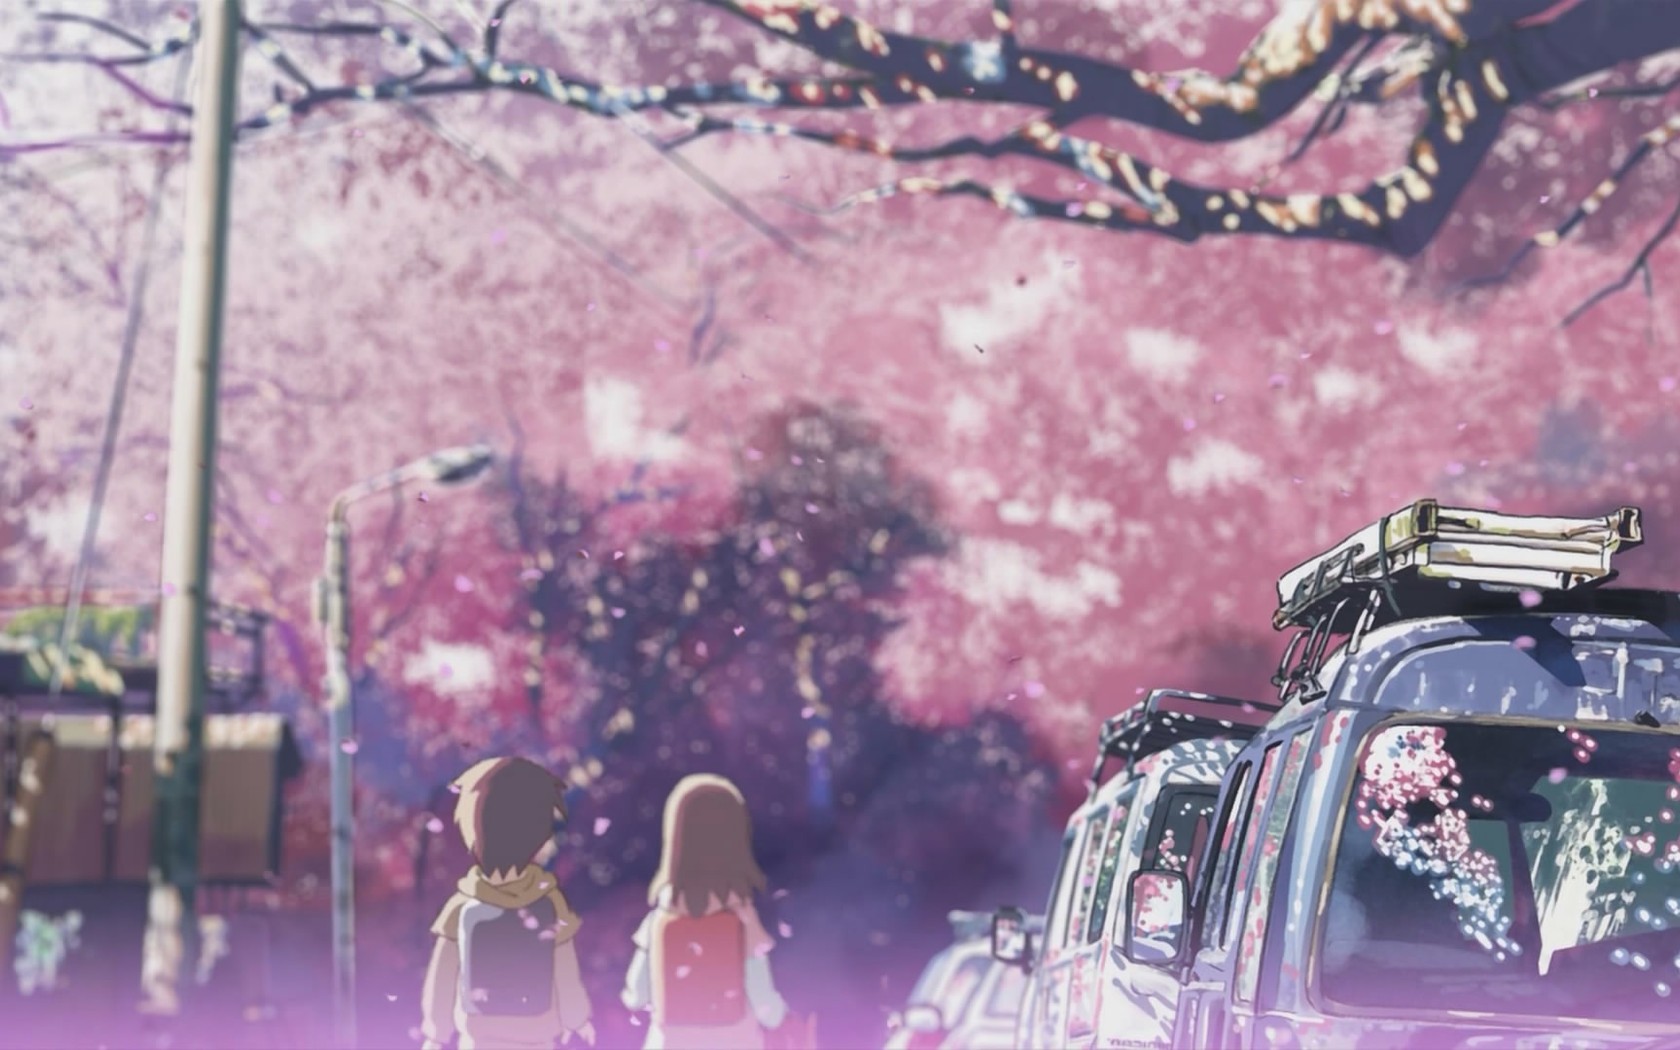 Wallpaper ID 347209  Anime 5 Centimeters Per Second Phone Wallpaper   1125x2436 free download